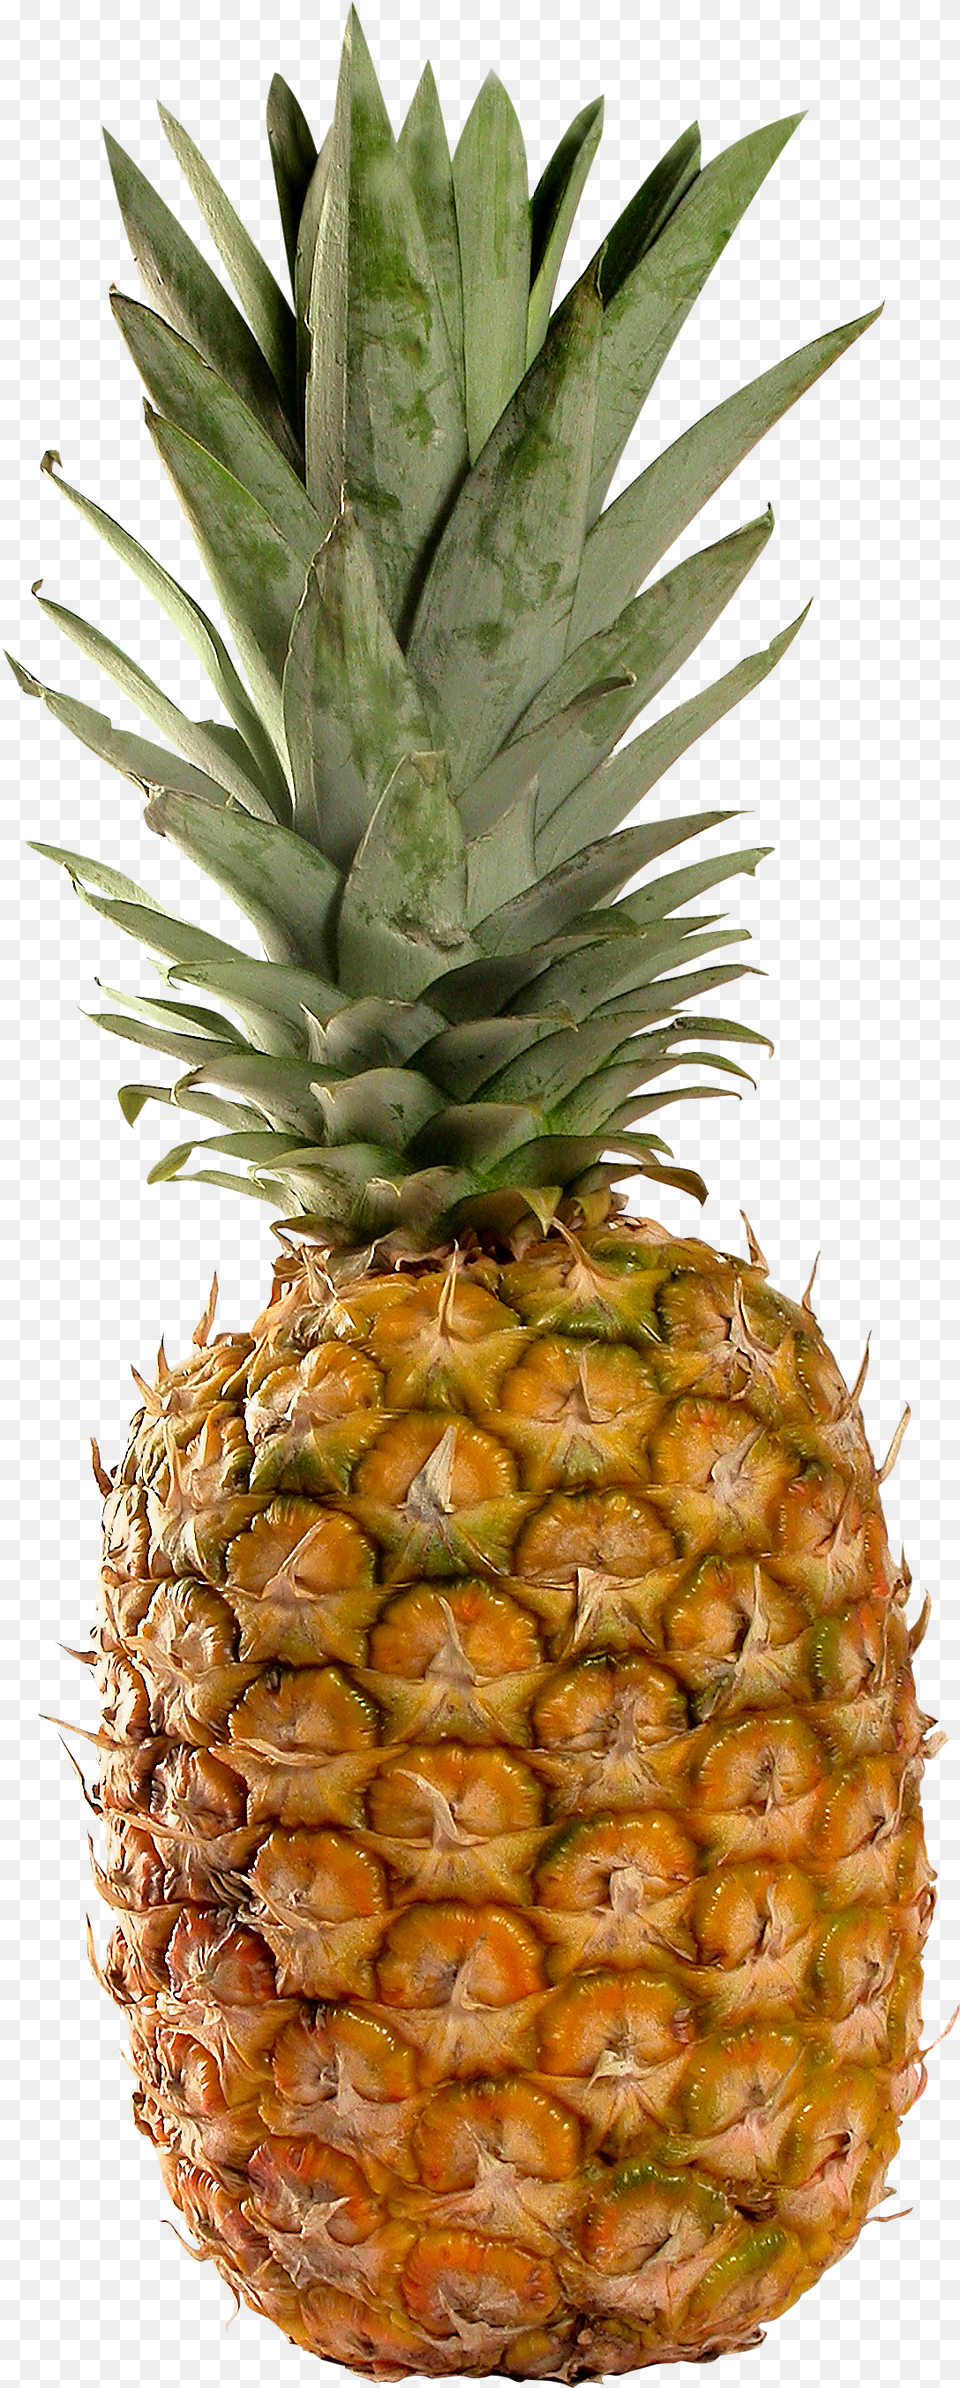 Pineapple, Food, Fruit, Plant, Produce Png